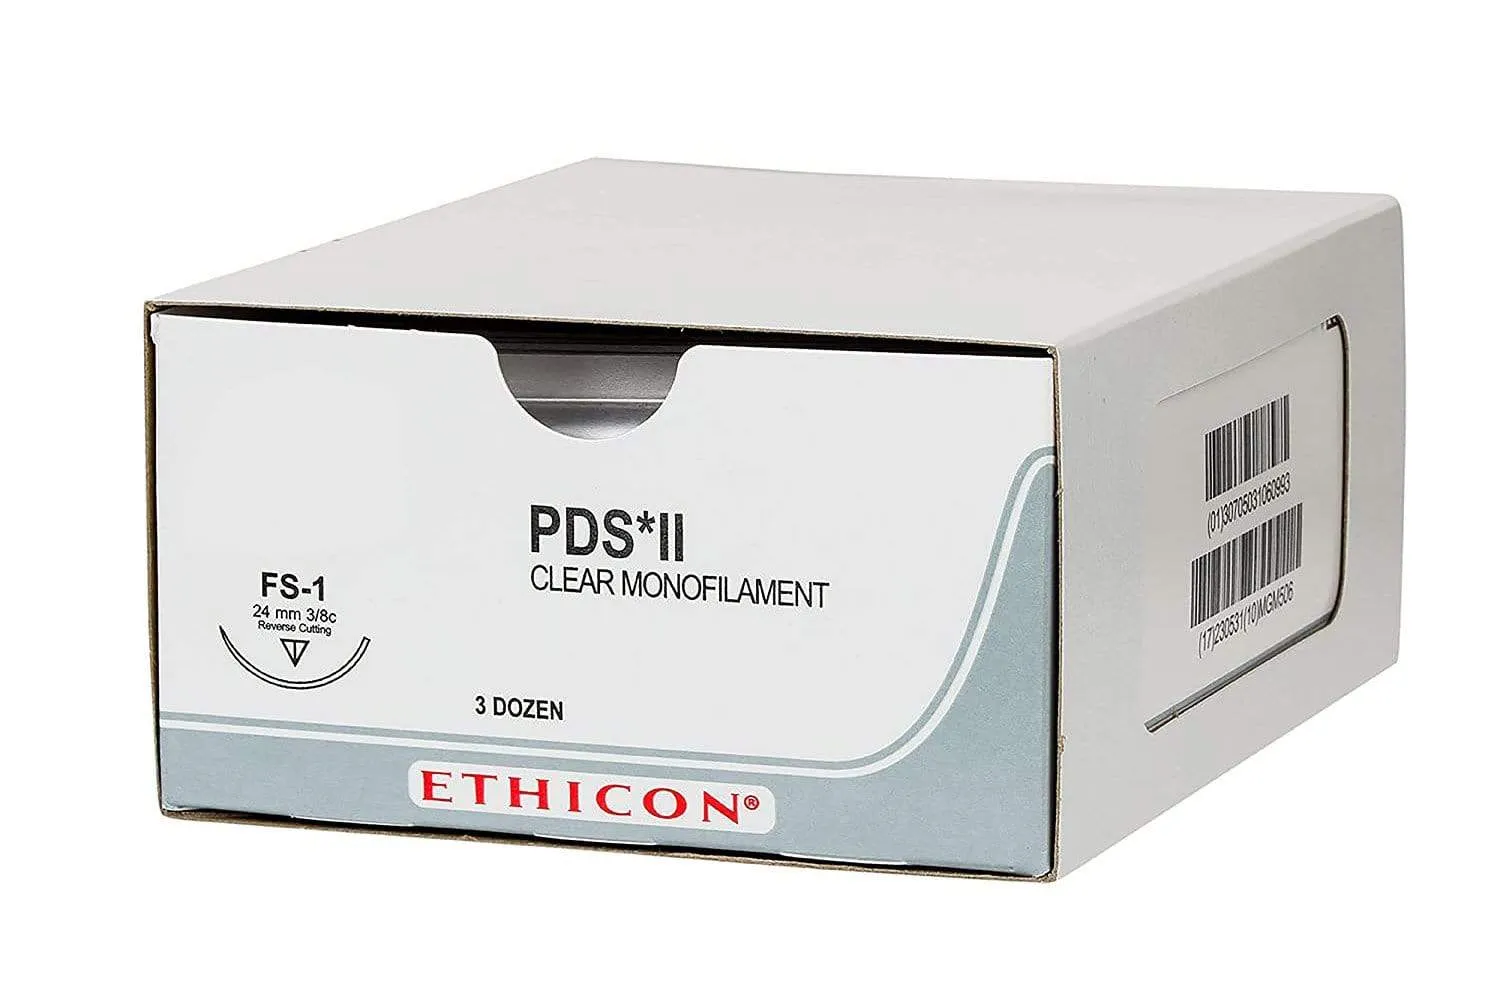 Ethicon PDS II Sutures USP 6-0, 3/8 Circle Round Body BV Double Needle - W9093H -12 Foils